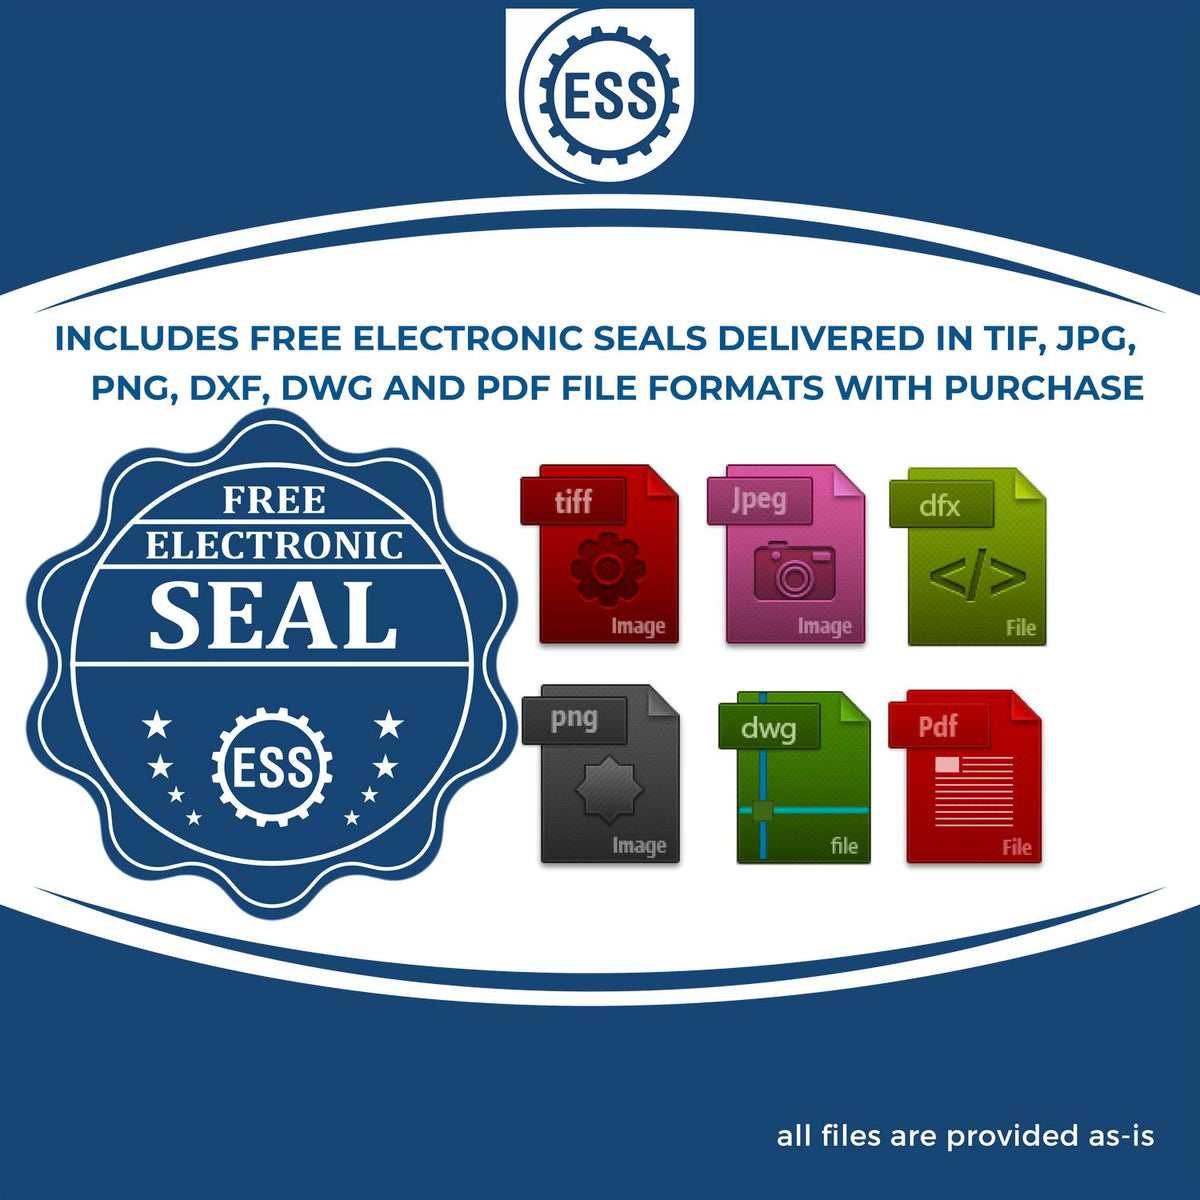 An infographic for the free electronic seal for the Slim Pre-Inked State Seal Notary Stamp for Mississippi illustrating the different file type icons such as DXF, DWG, TIF, JPG and PNG.